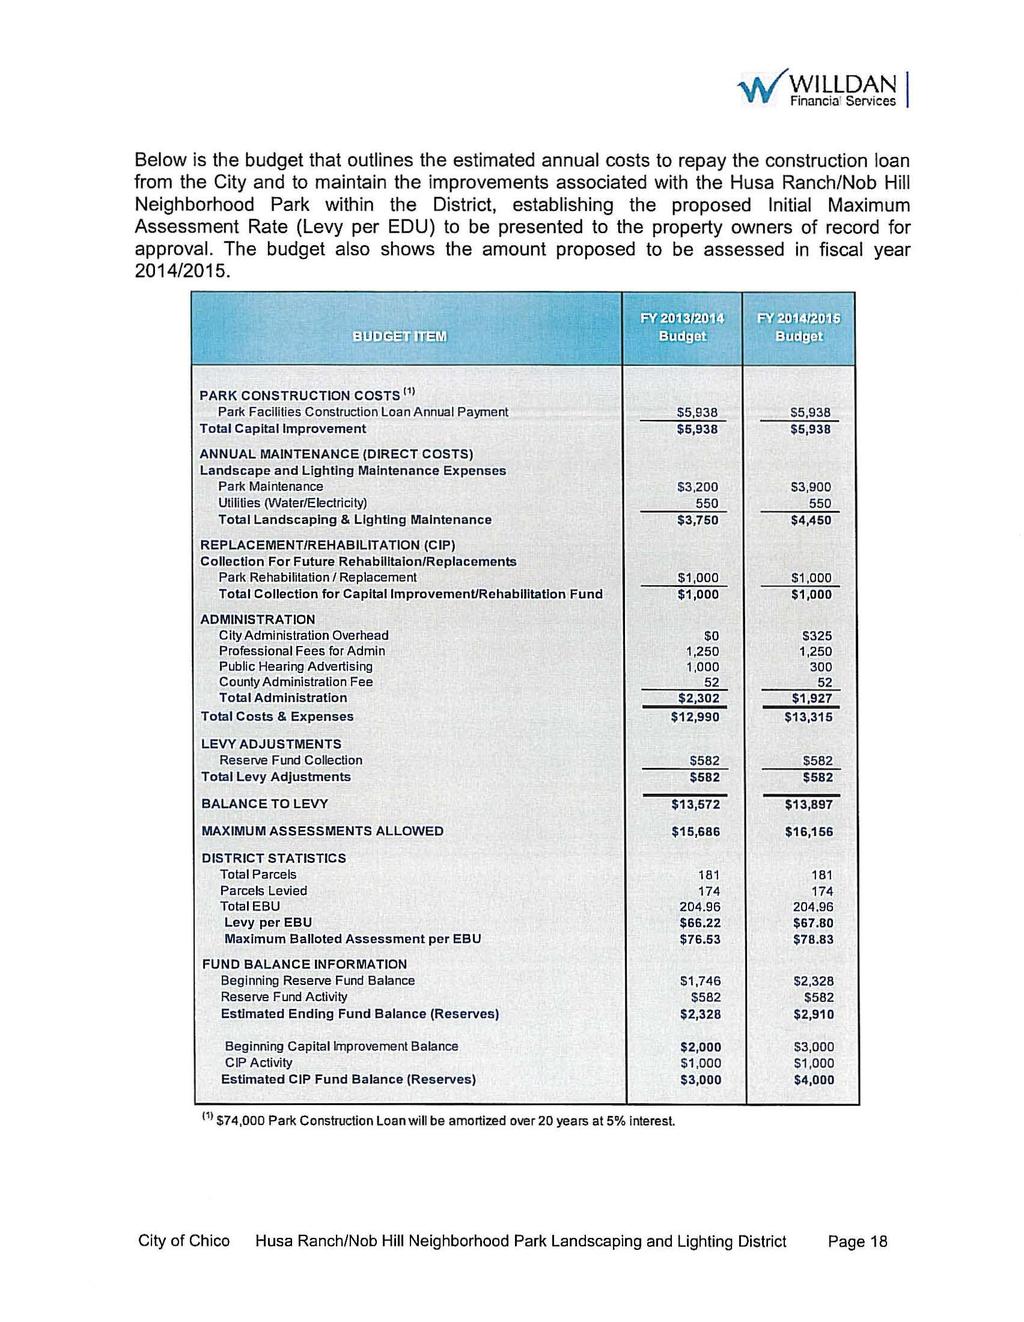 Below is the budget that outlines the estimated annual costs to repay the construction loan from the City and to maintain the improvements associated with the Husa Ranch/Nob Hill Neighborhood Park